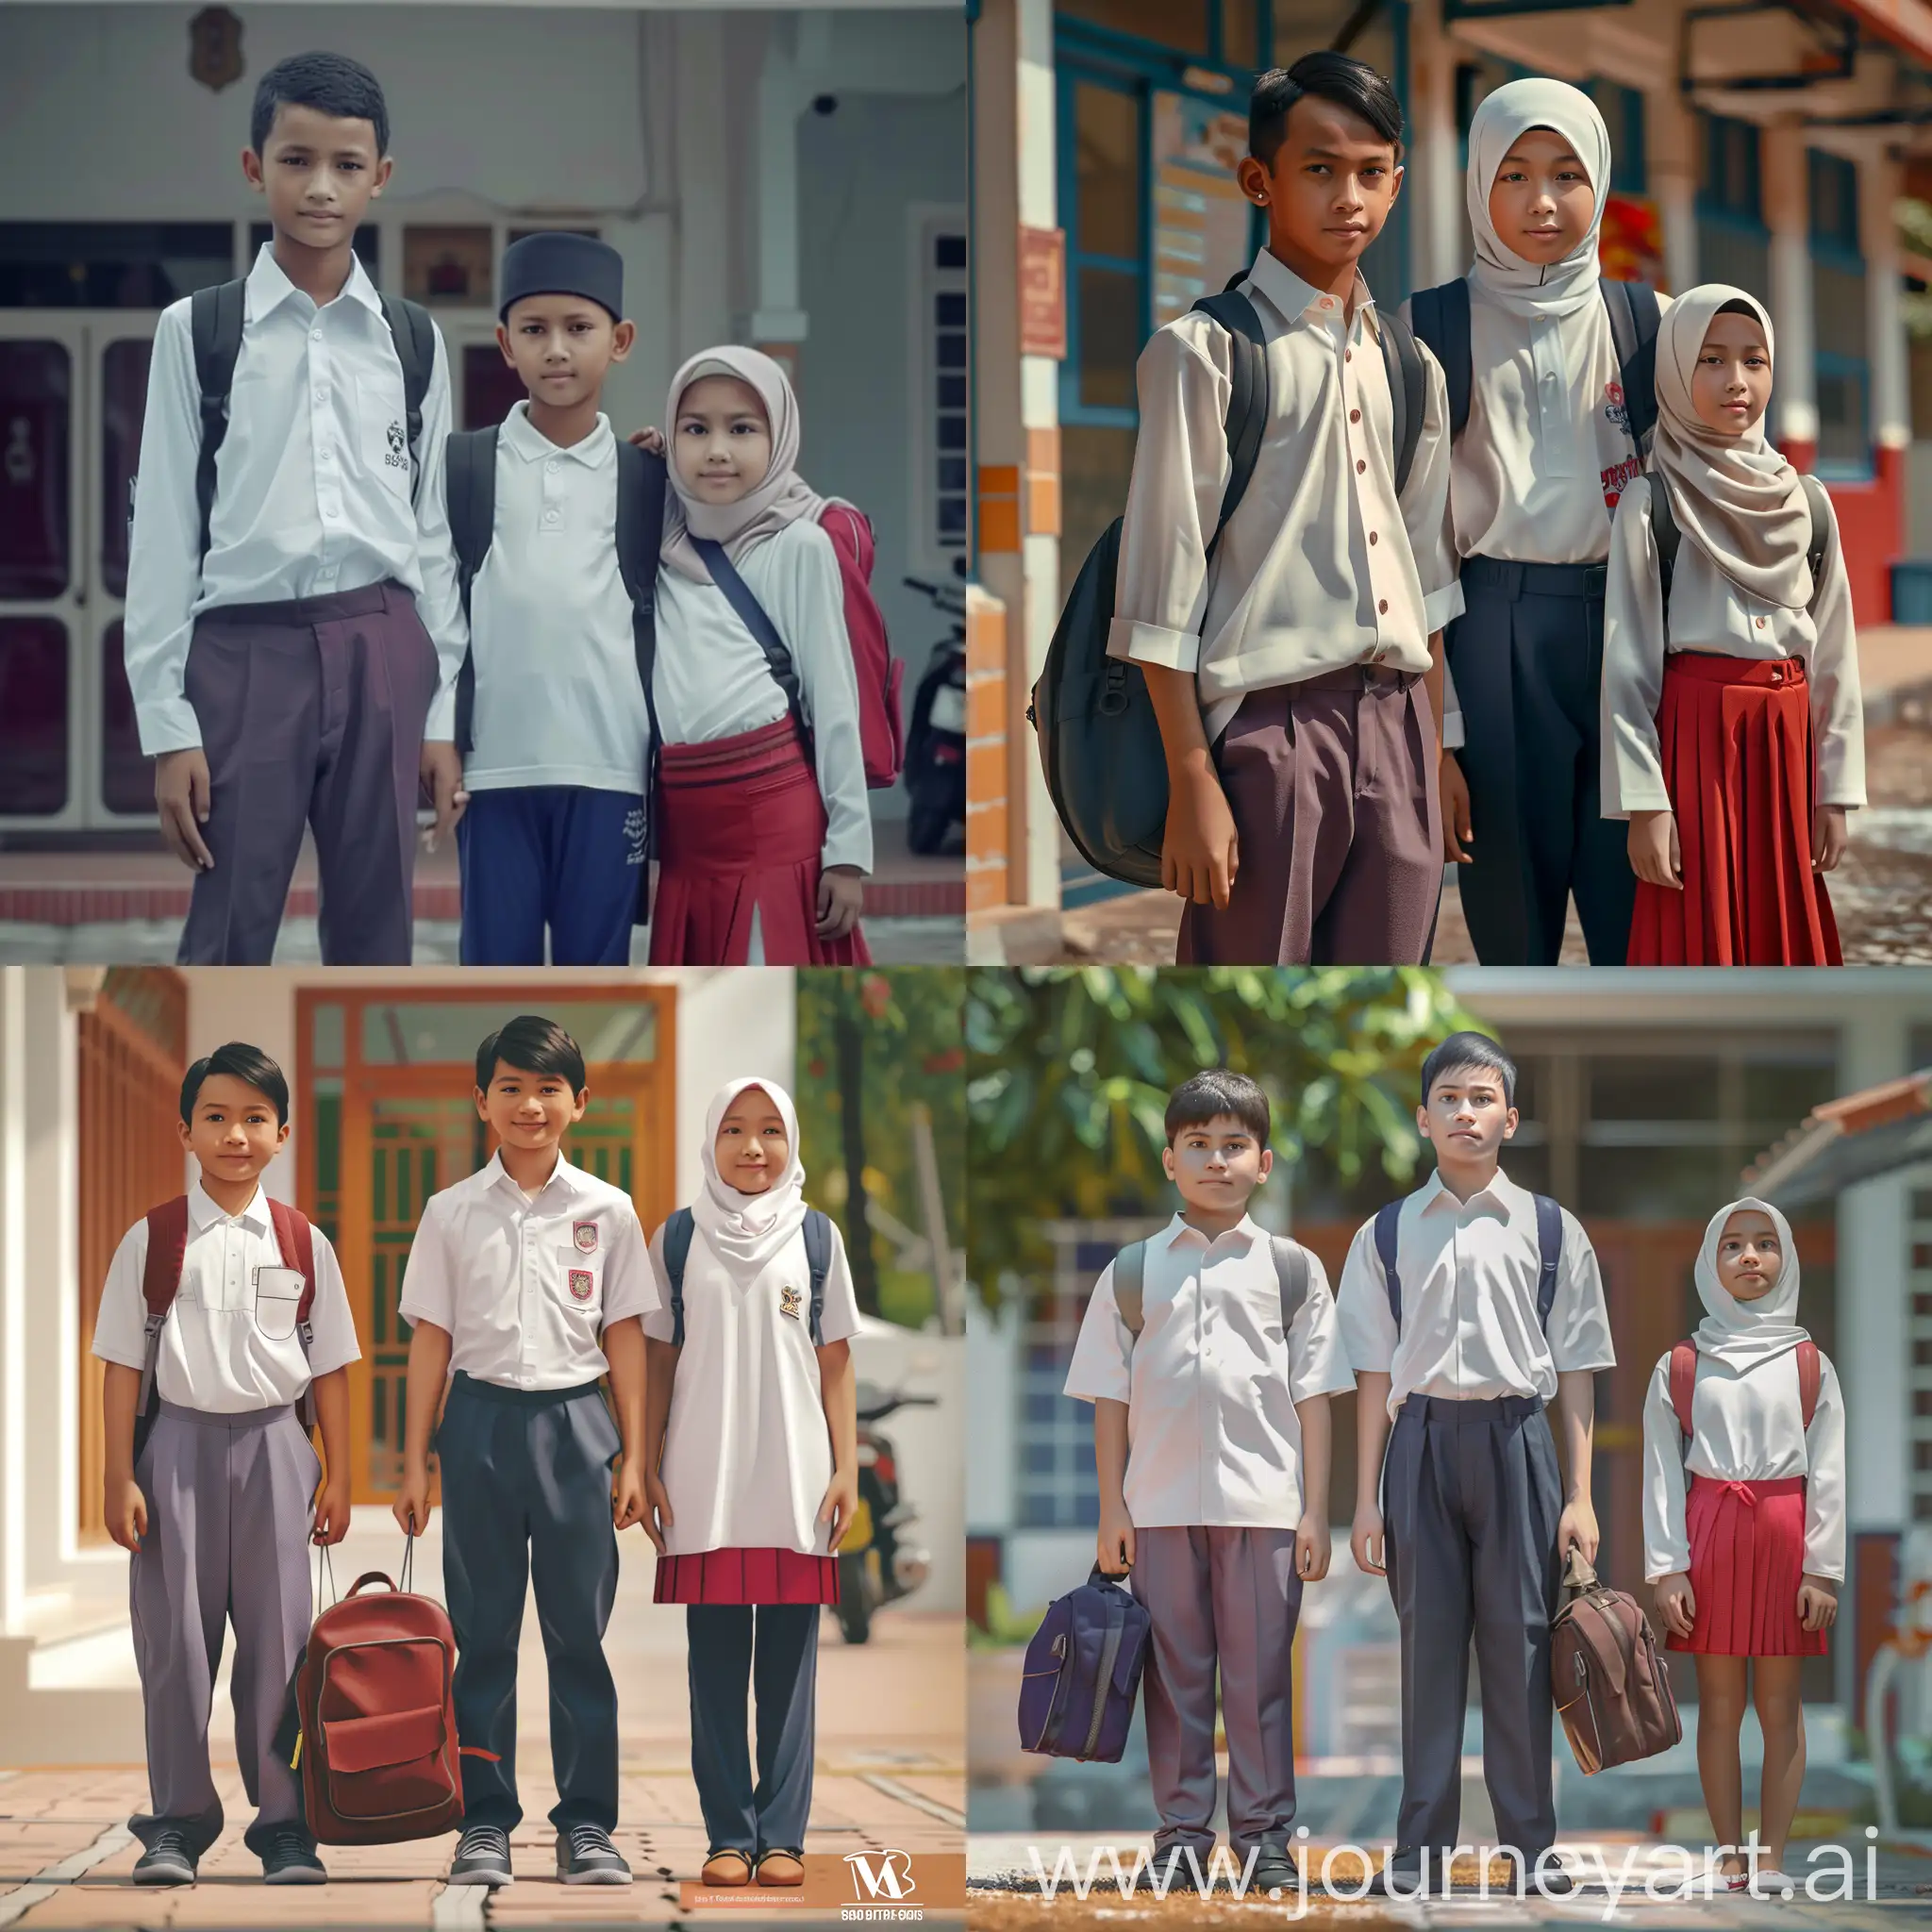 Indonesian-School-Students-Posed-in-Front-of-School-with-Backpacks